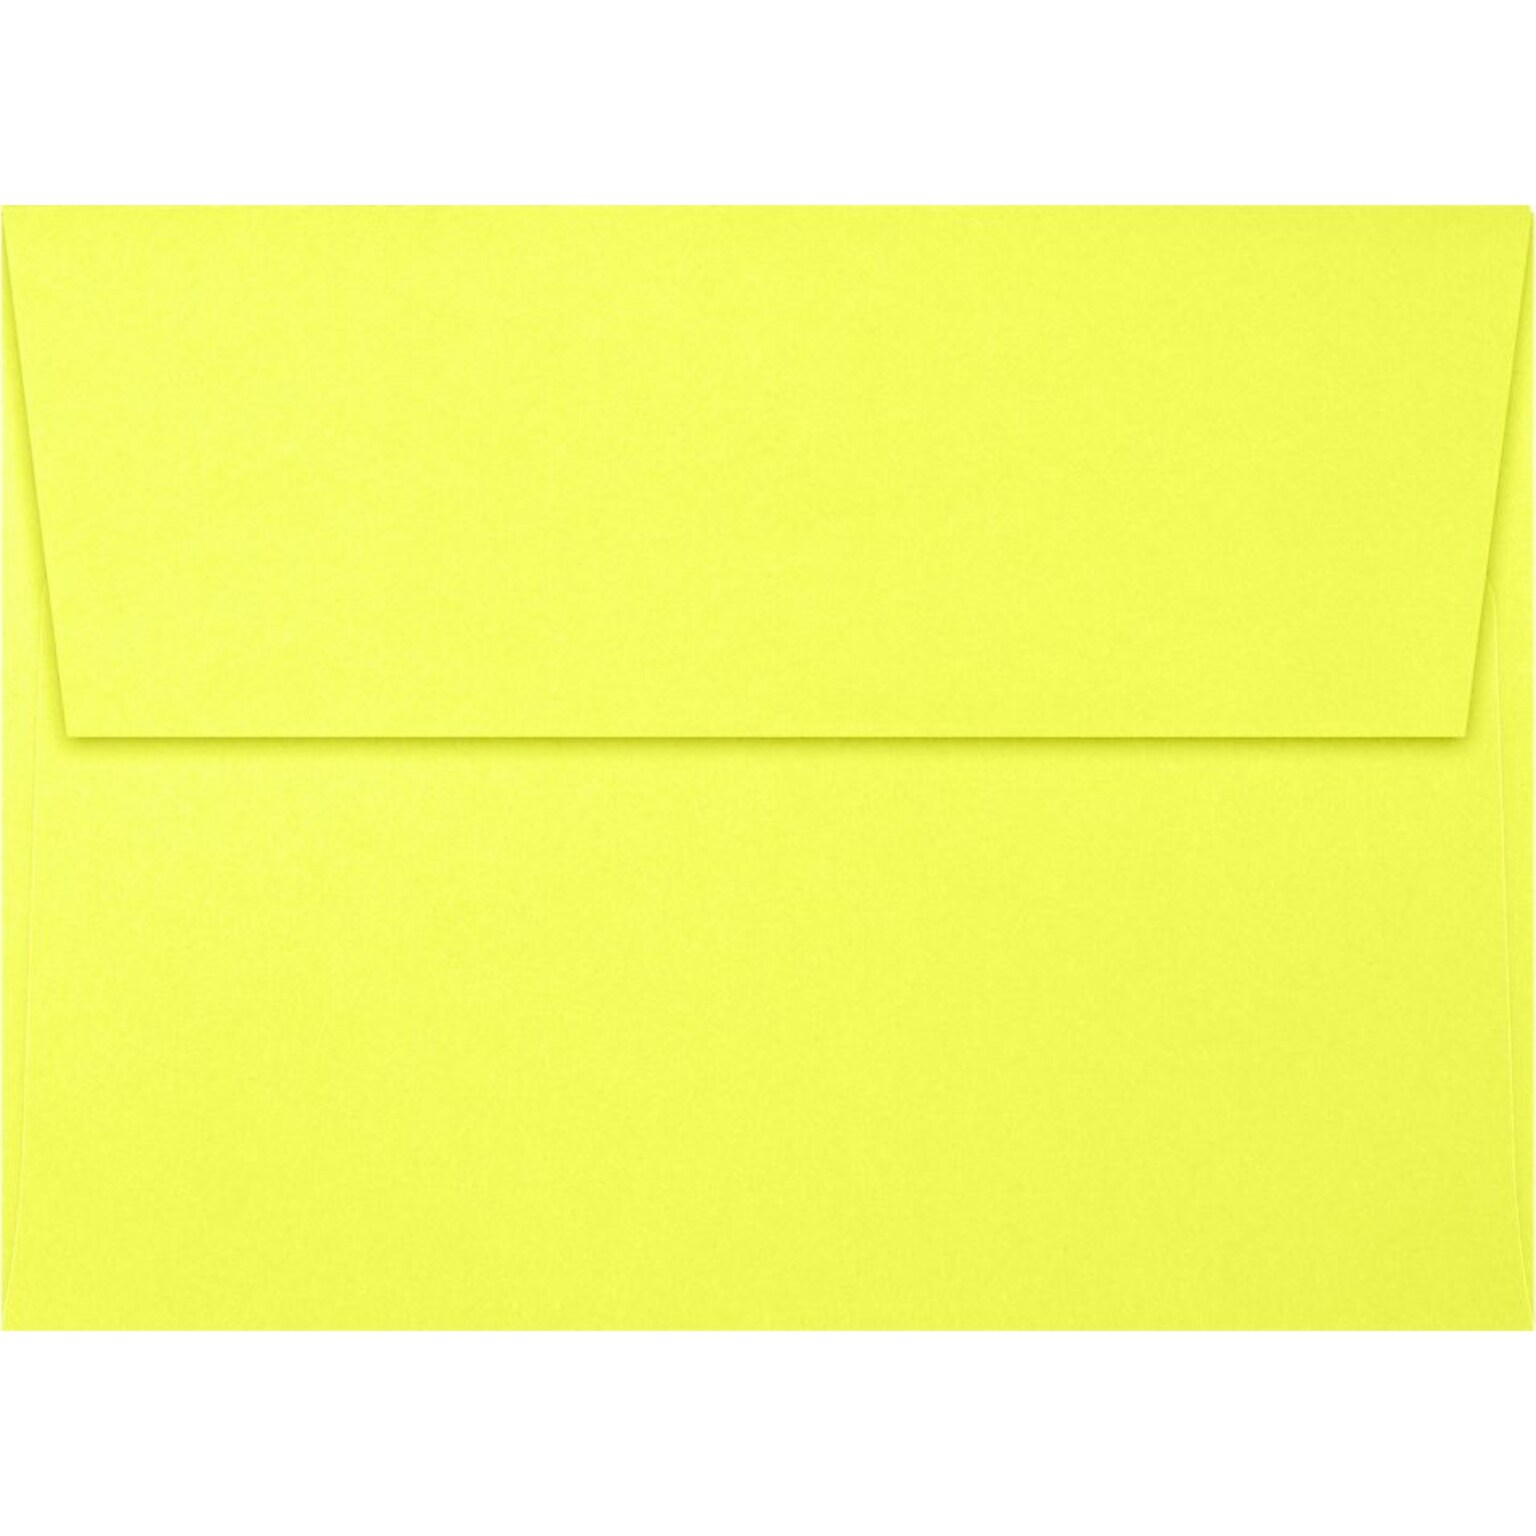 LUX A7 Invitation Envelopes (5 1/4 x 7 1/4) 250/Pack, Electric Yellow (4880-ULEM-250)